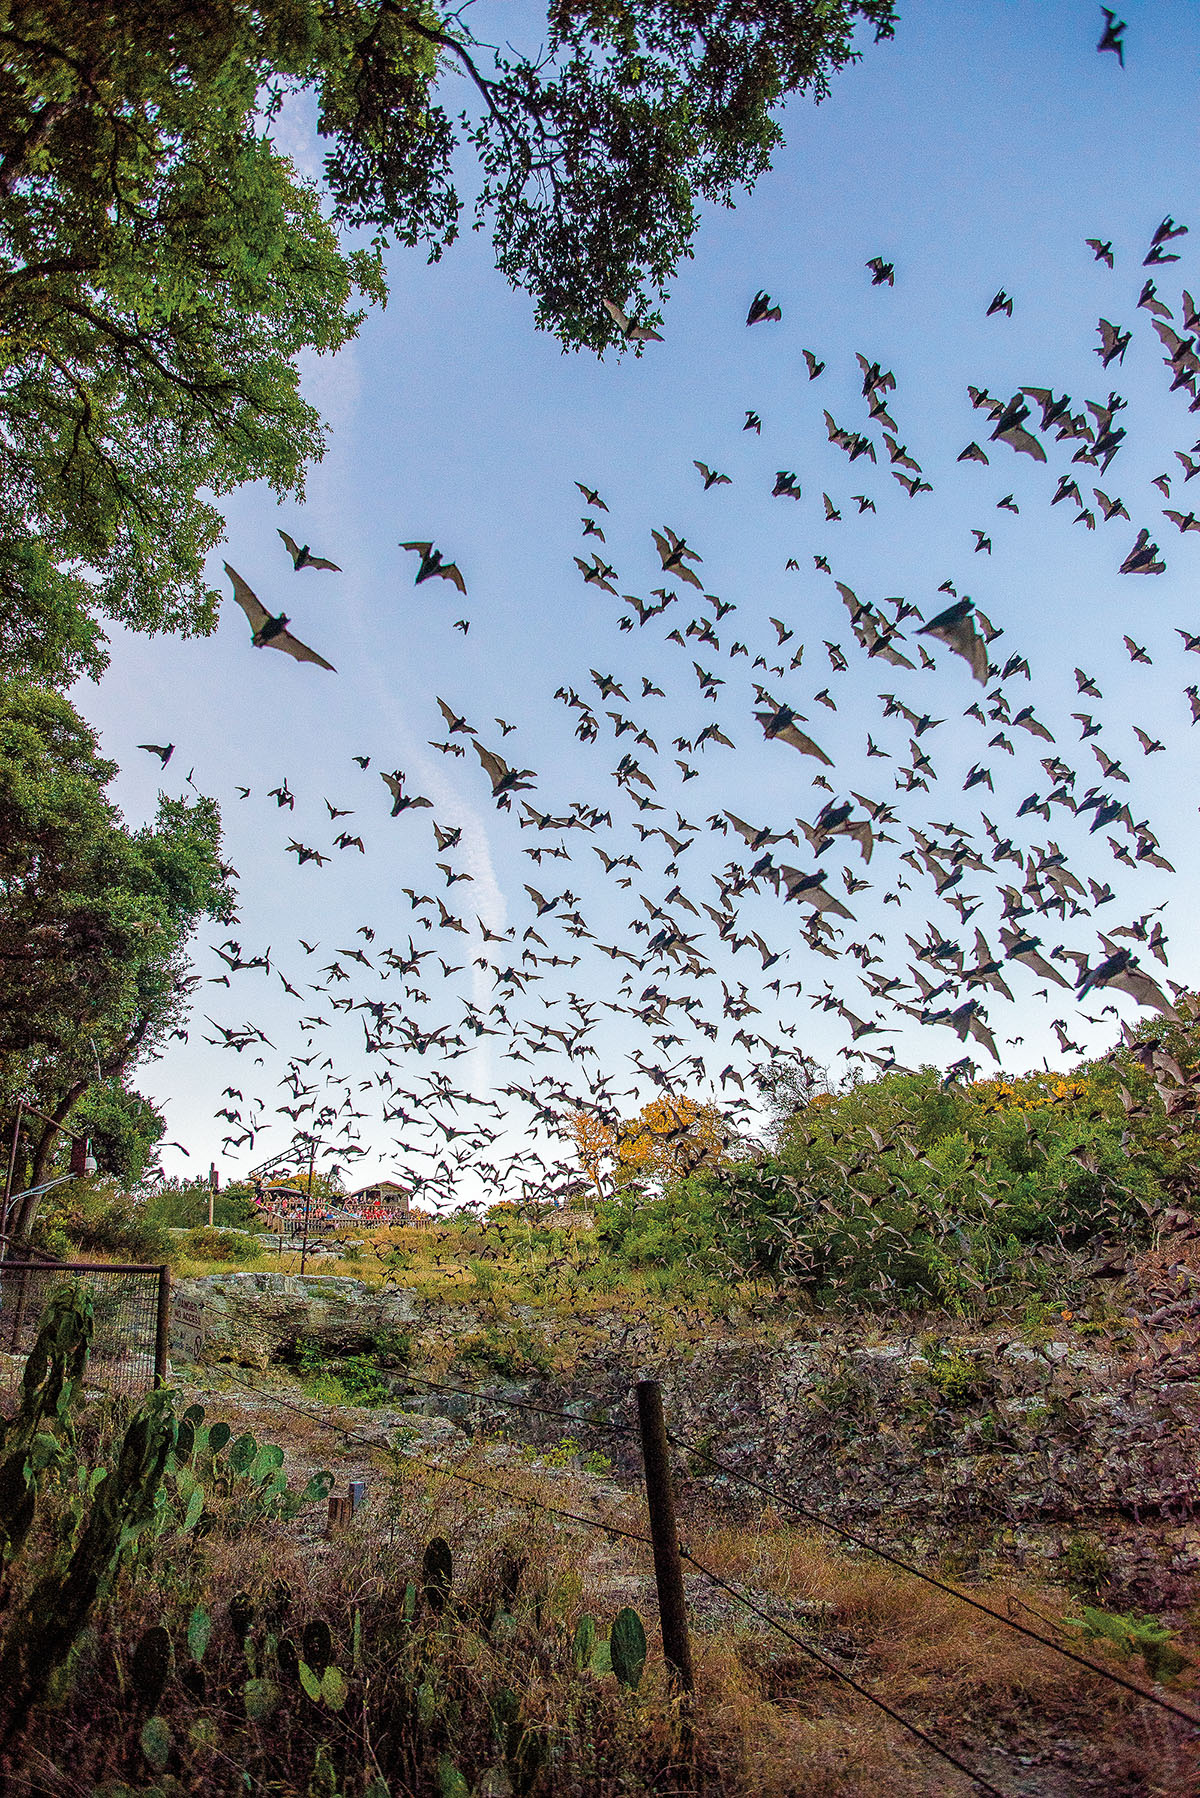 Bats fly out of a stone cave in front of blue sky